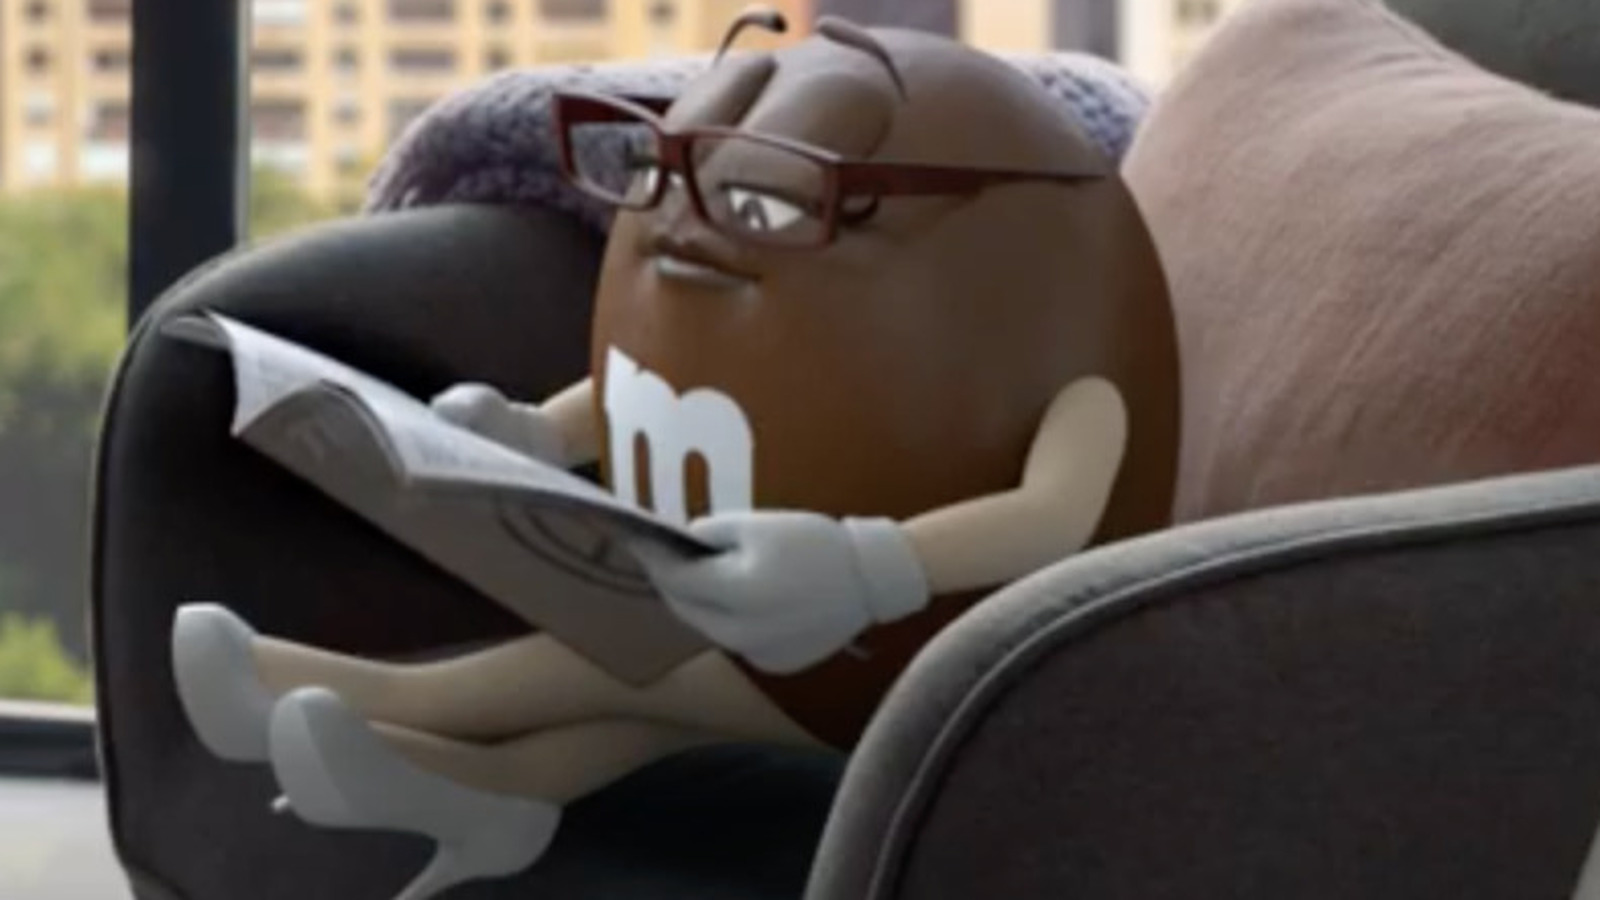 Who Are The Voice Actors In The Fudge Brownie M&Ms Commercial?